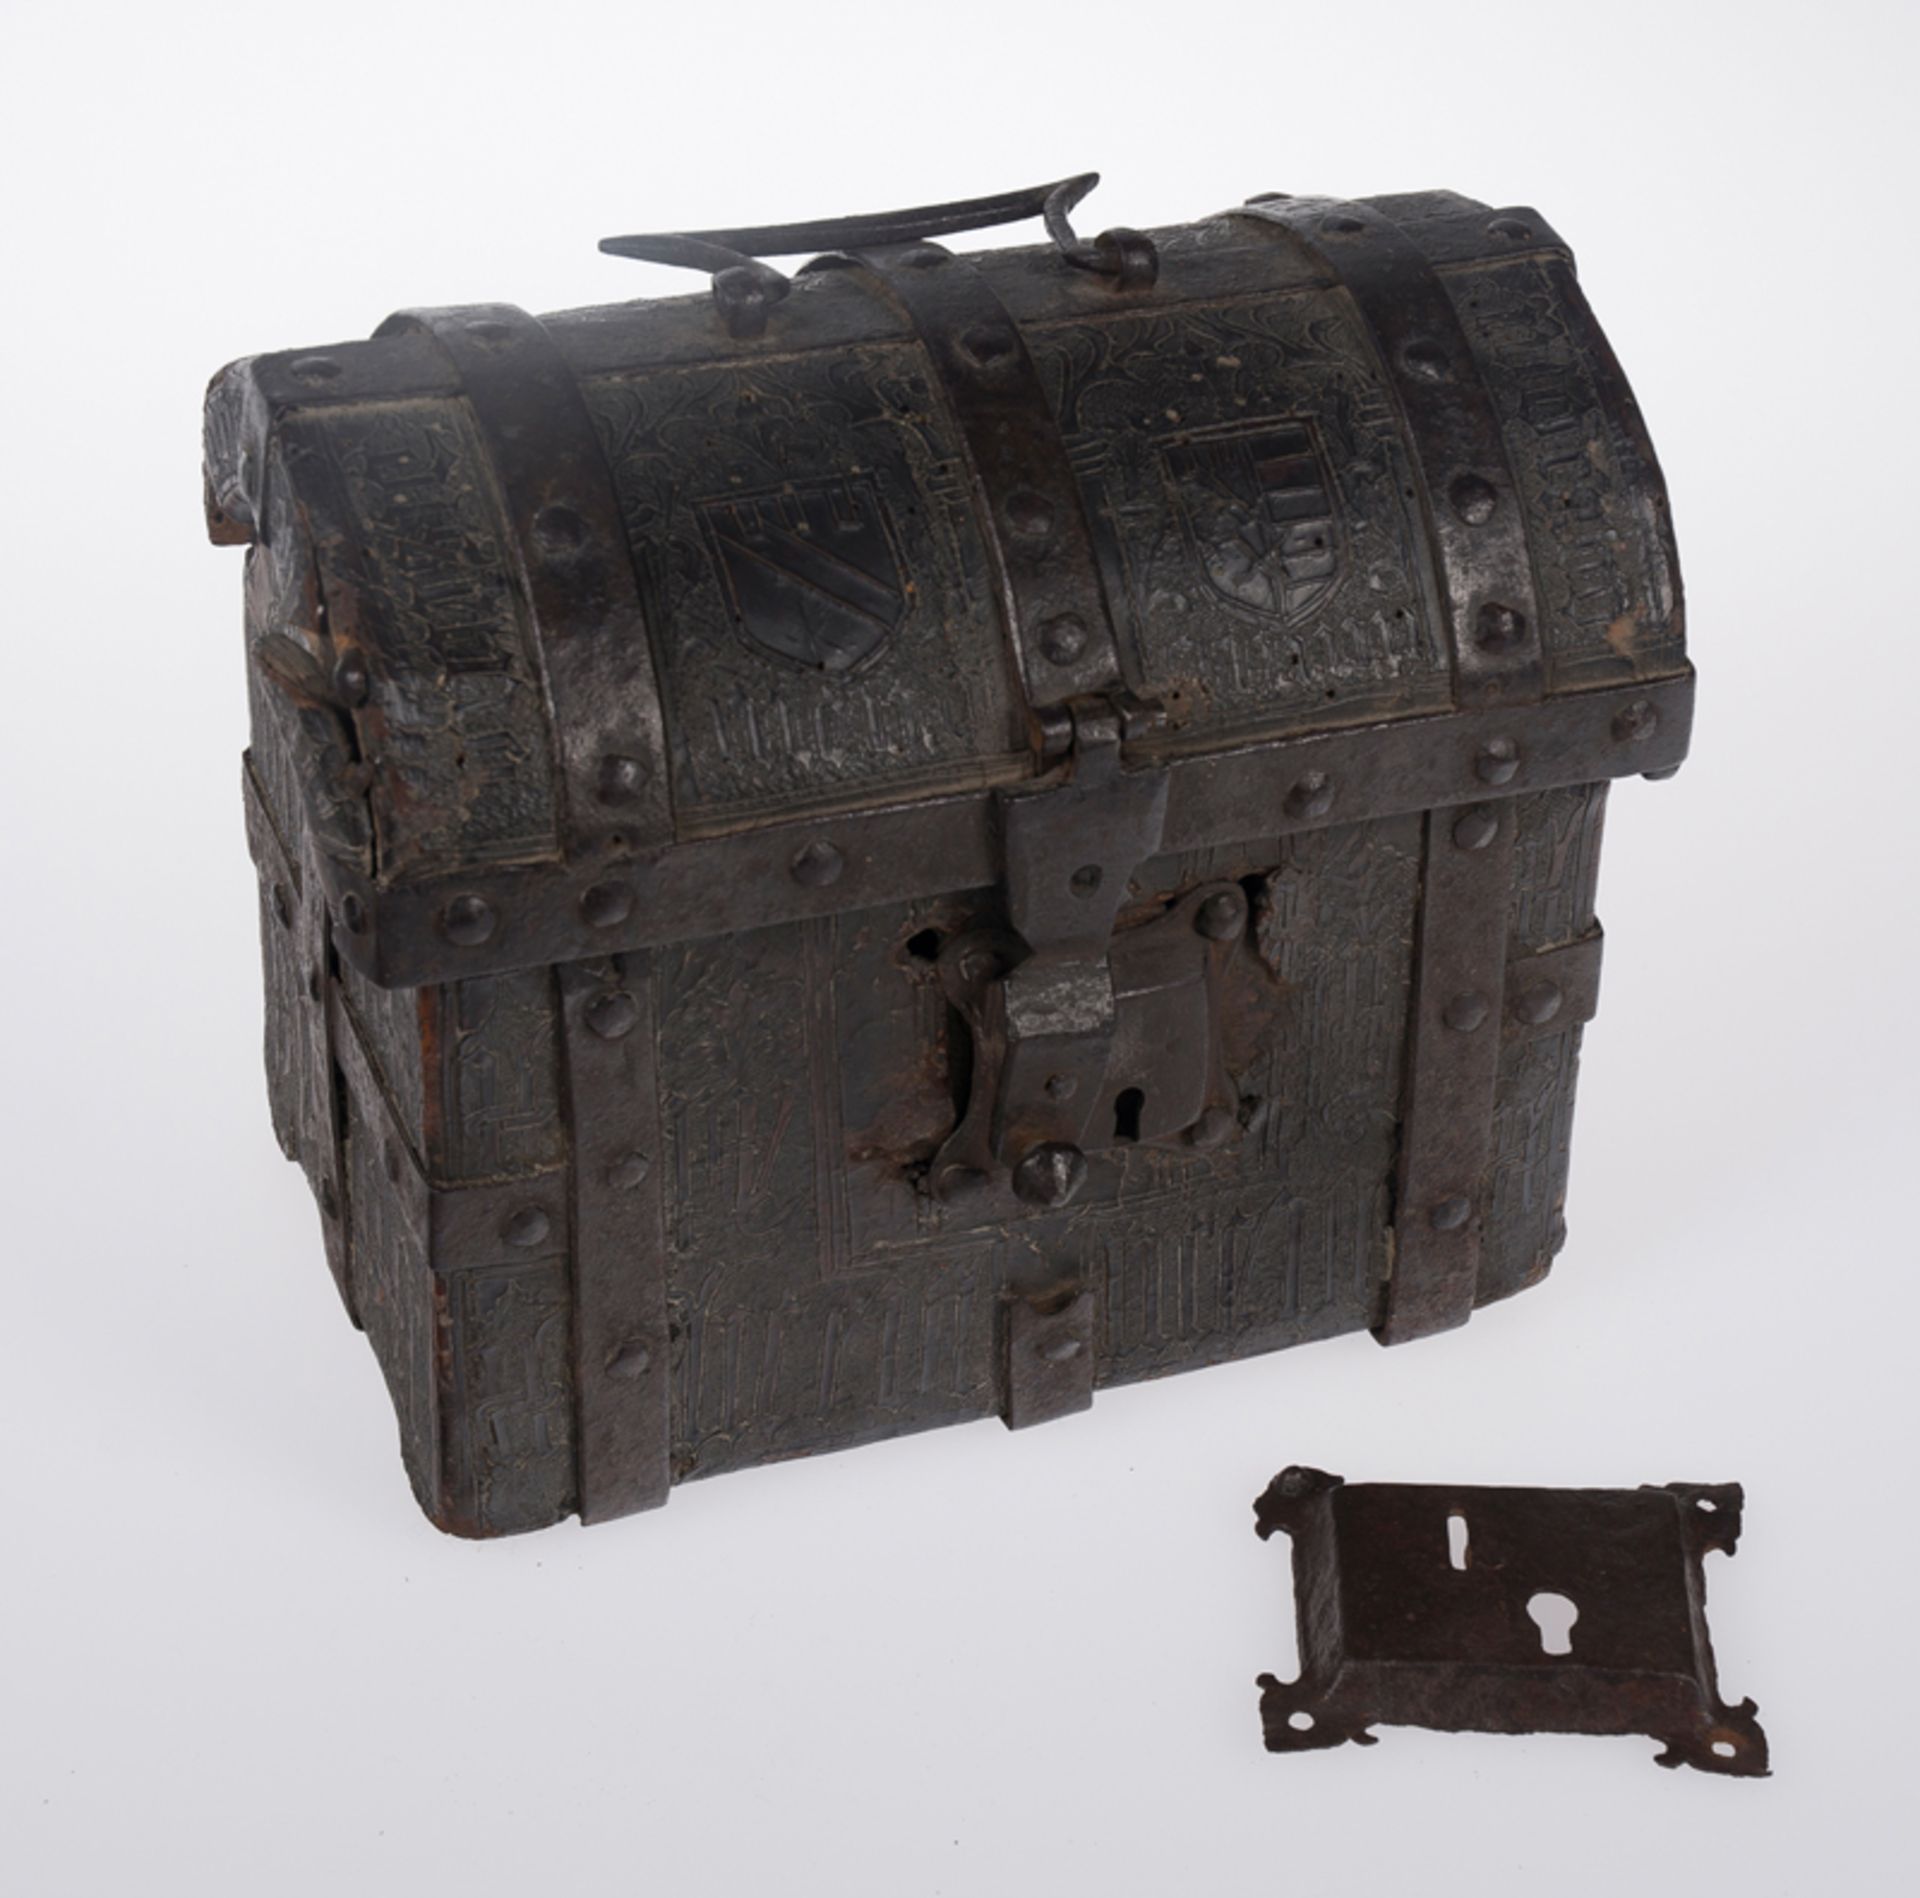 Wooden chest covered in embossed and engraved leather, with iron fittings. Gothic. 15th century. - Image 7 of 8